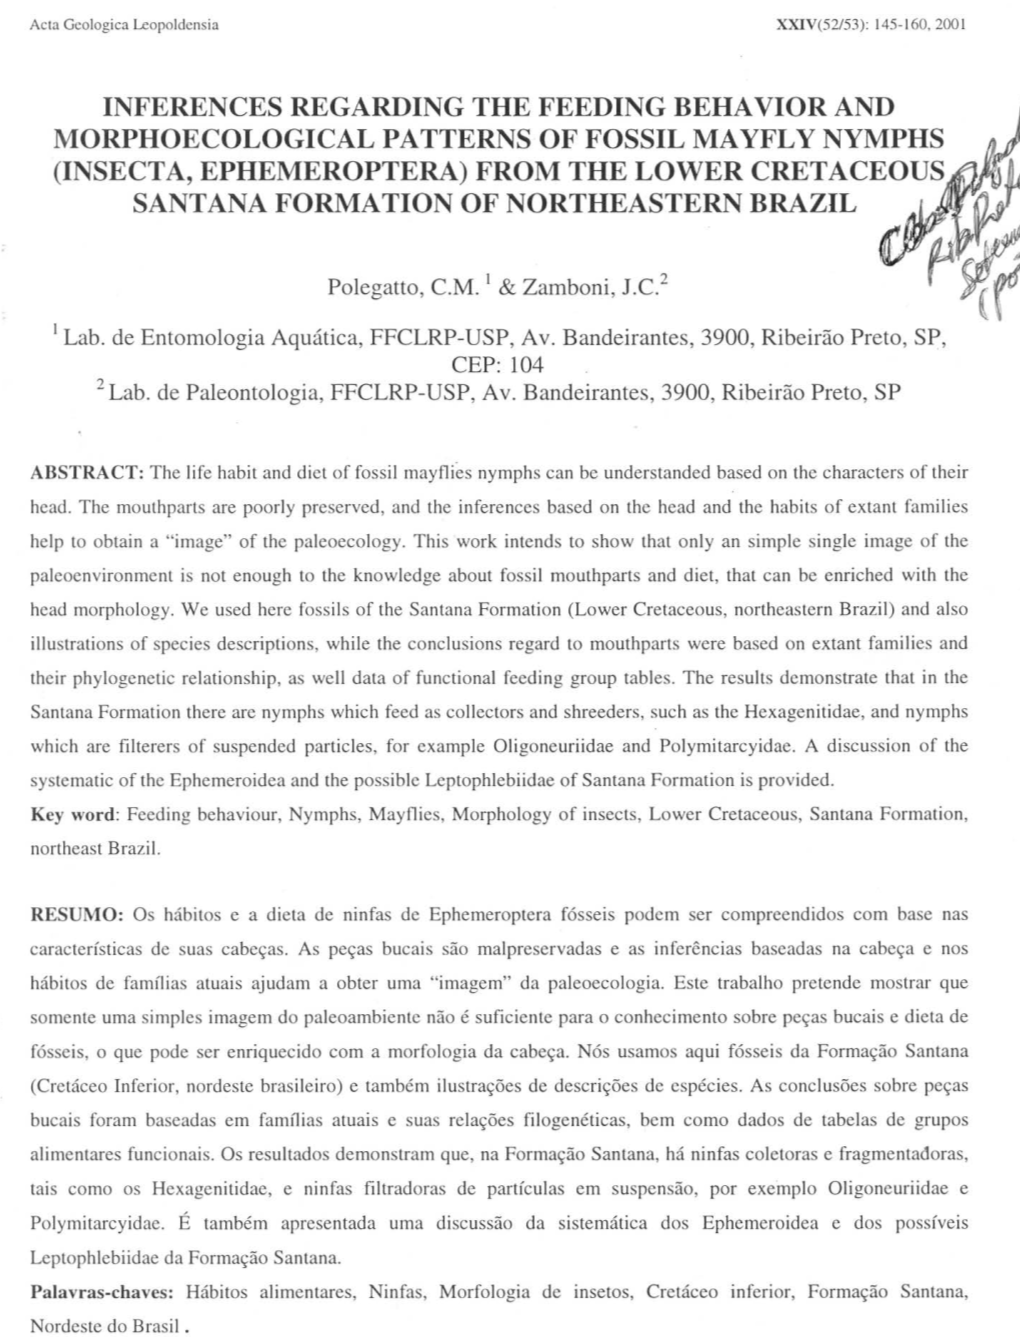 (Insecta, Ephemeroptera) from the Lower Cretaceous Santana Formation of Northeastern Brazil